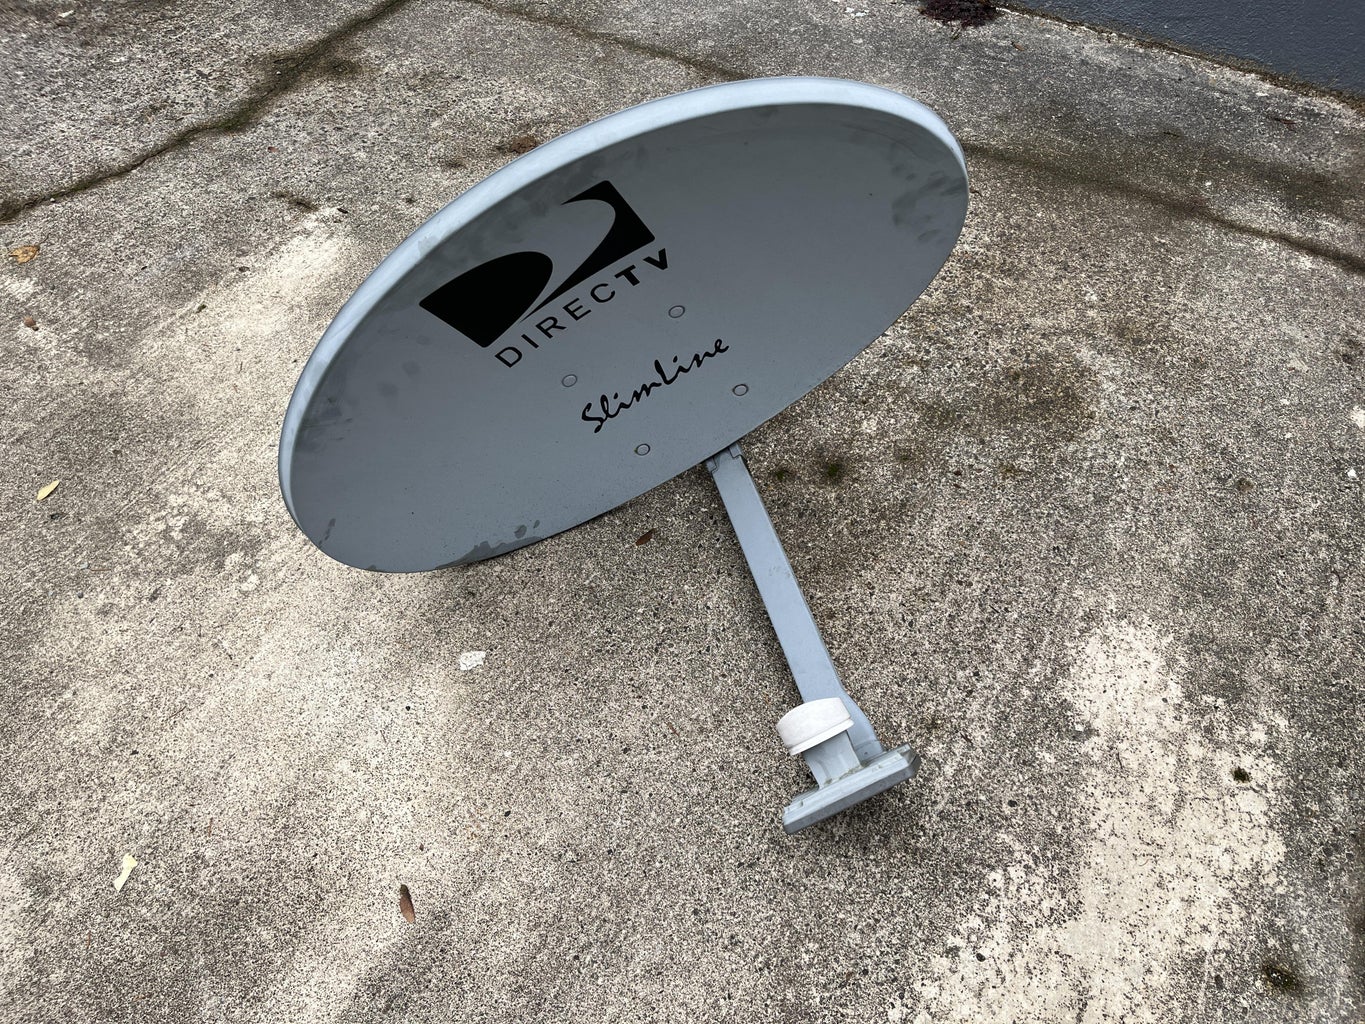 Remove Satellite Dish From Roof